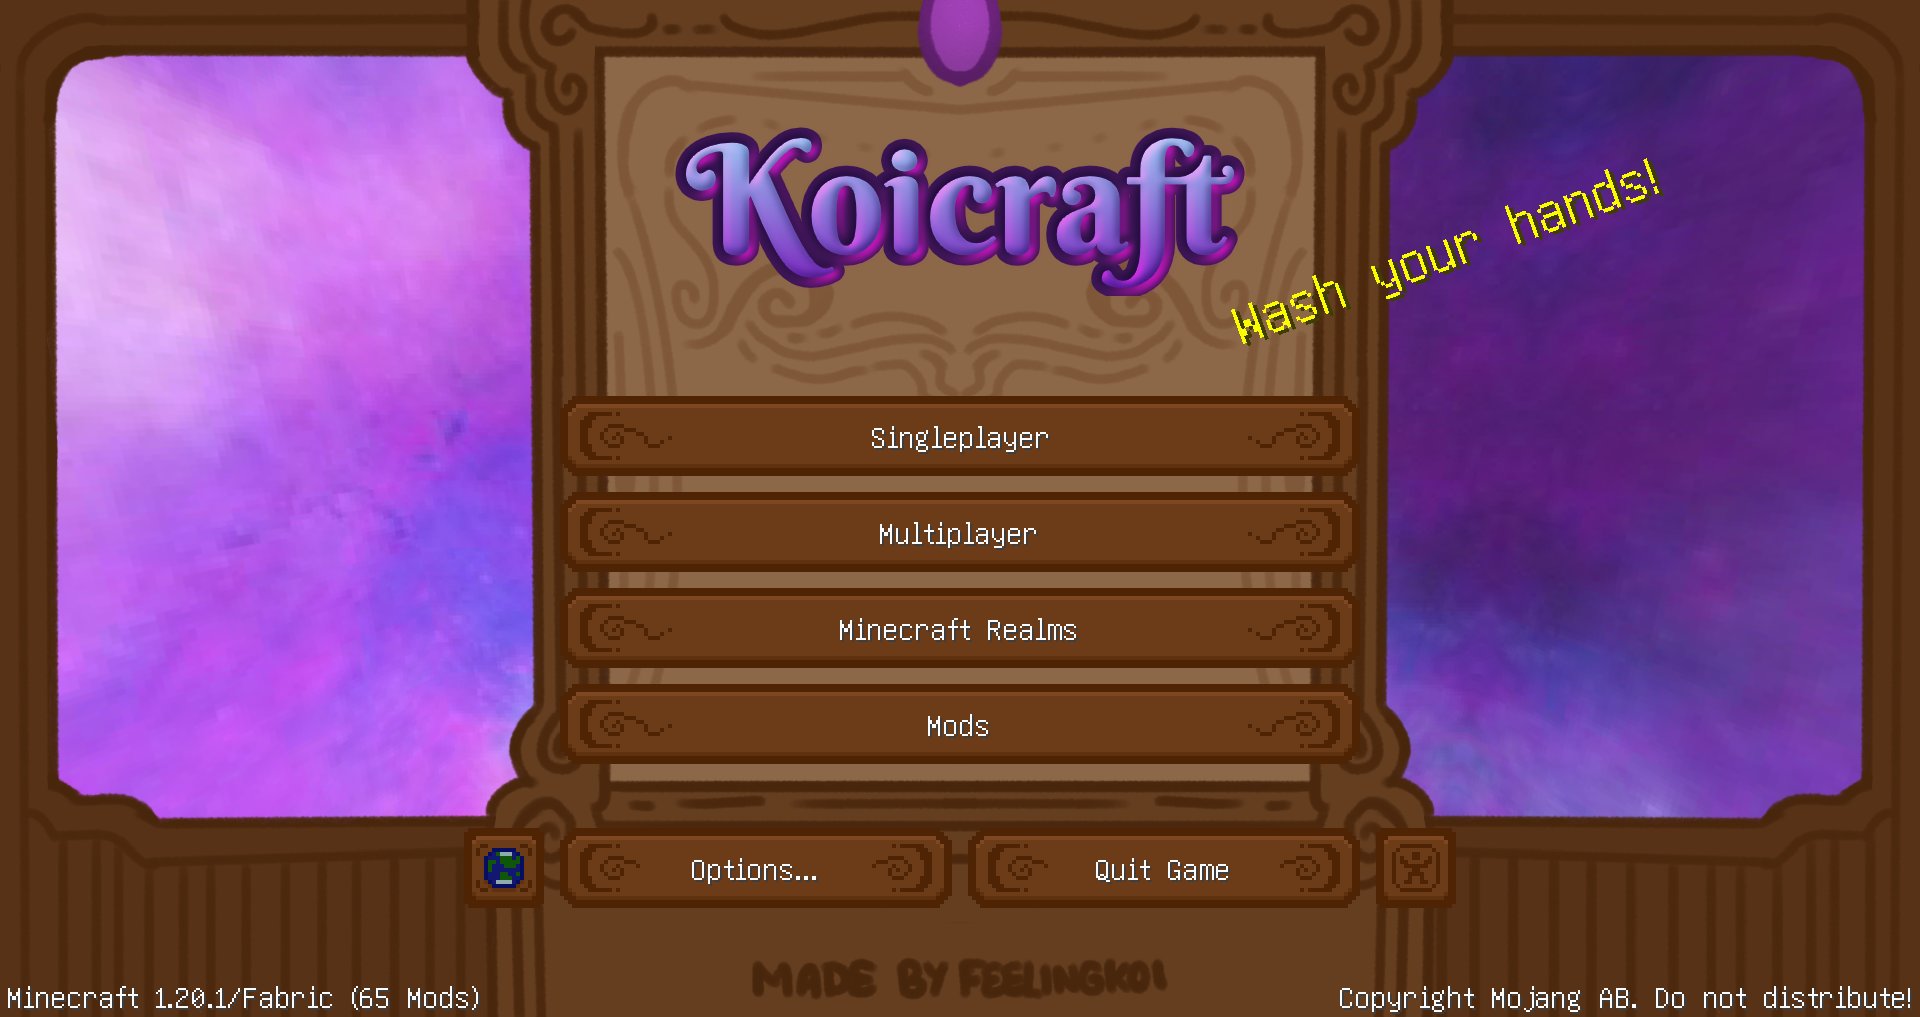 The UI for the Main Page